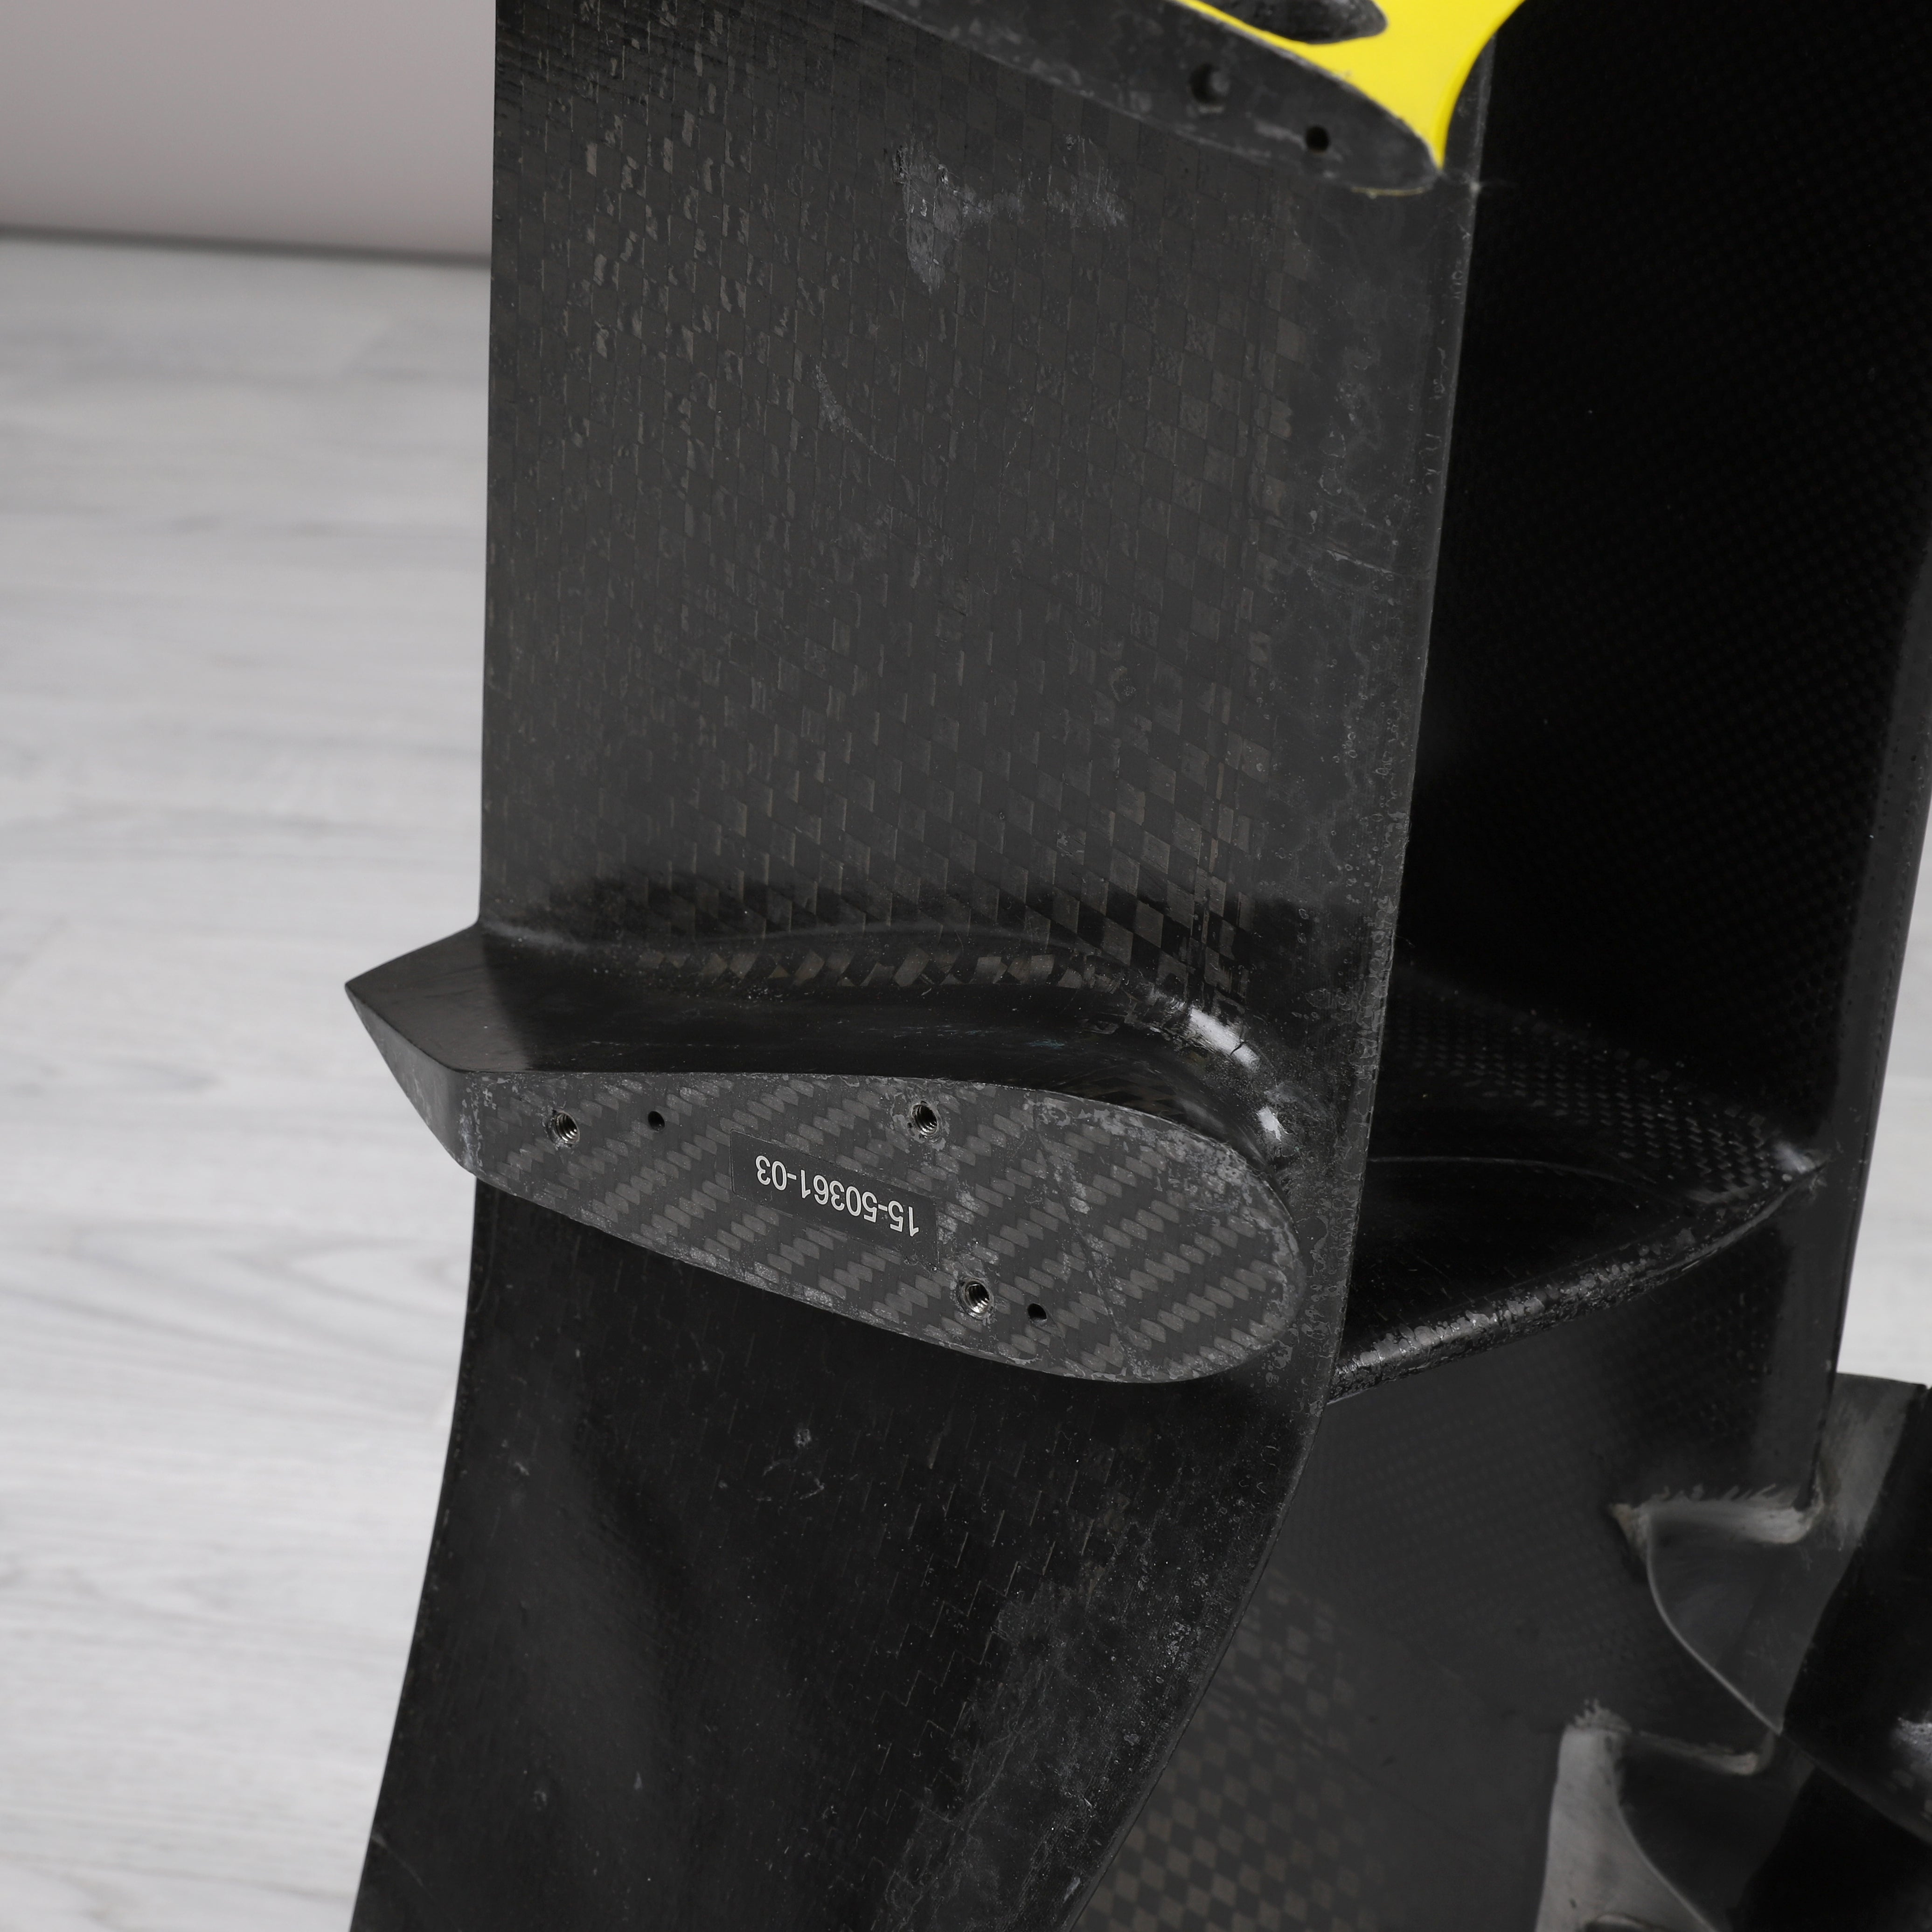 Renault F1 Team 2020 Left-Hand Sidepod Leading Edge with Dupont Branding